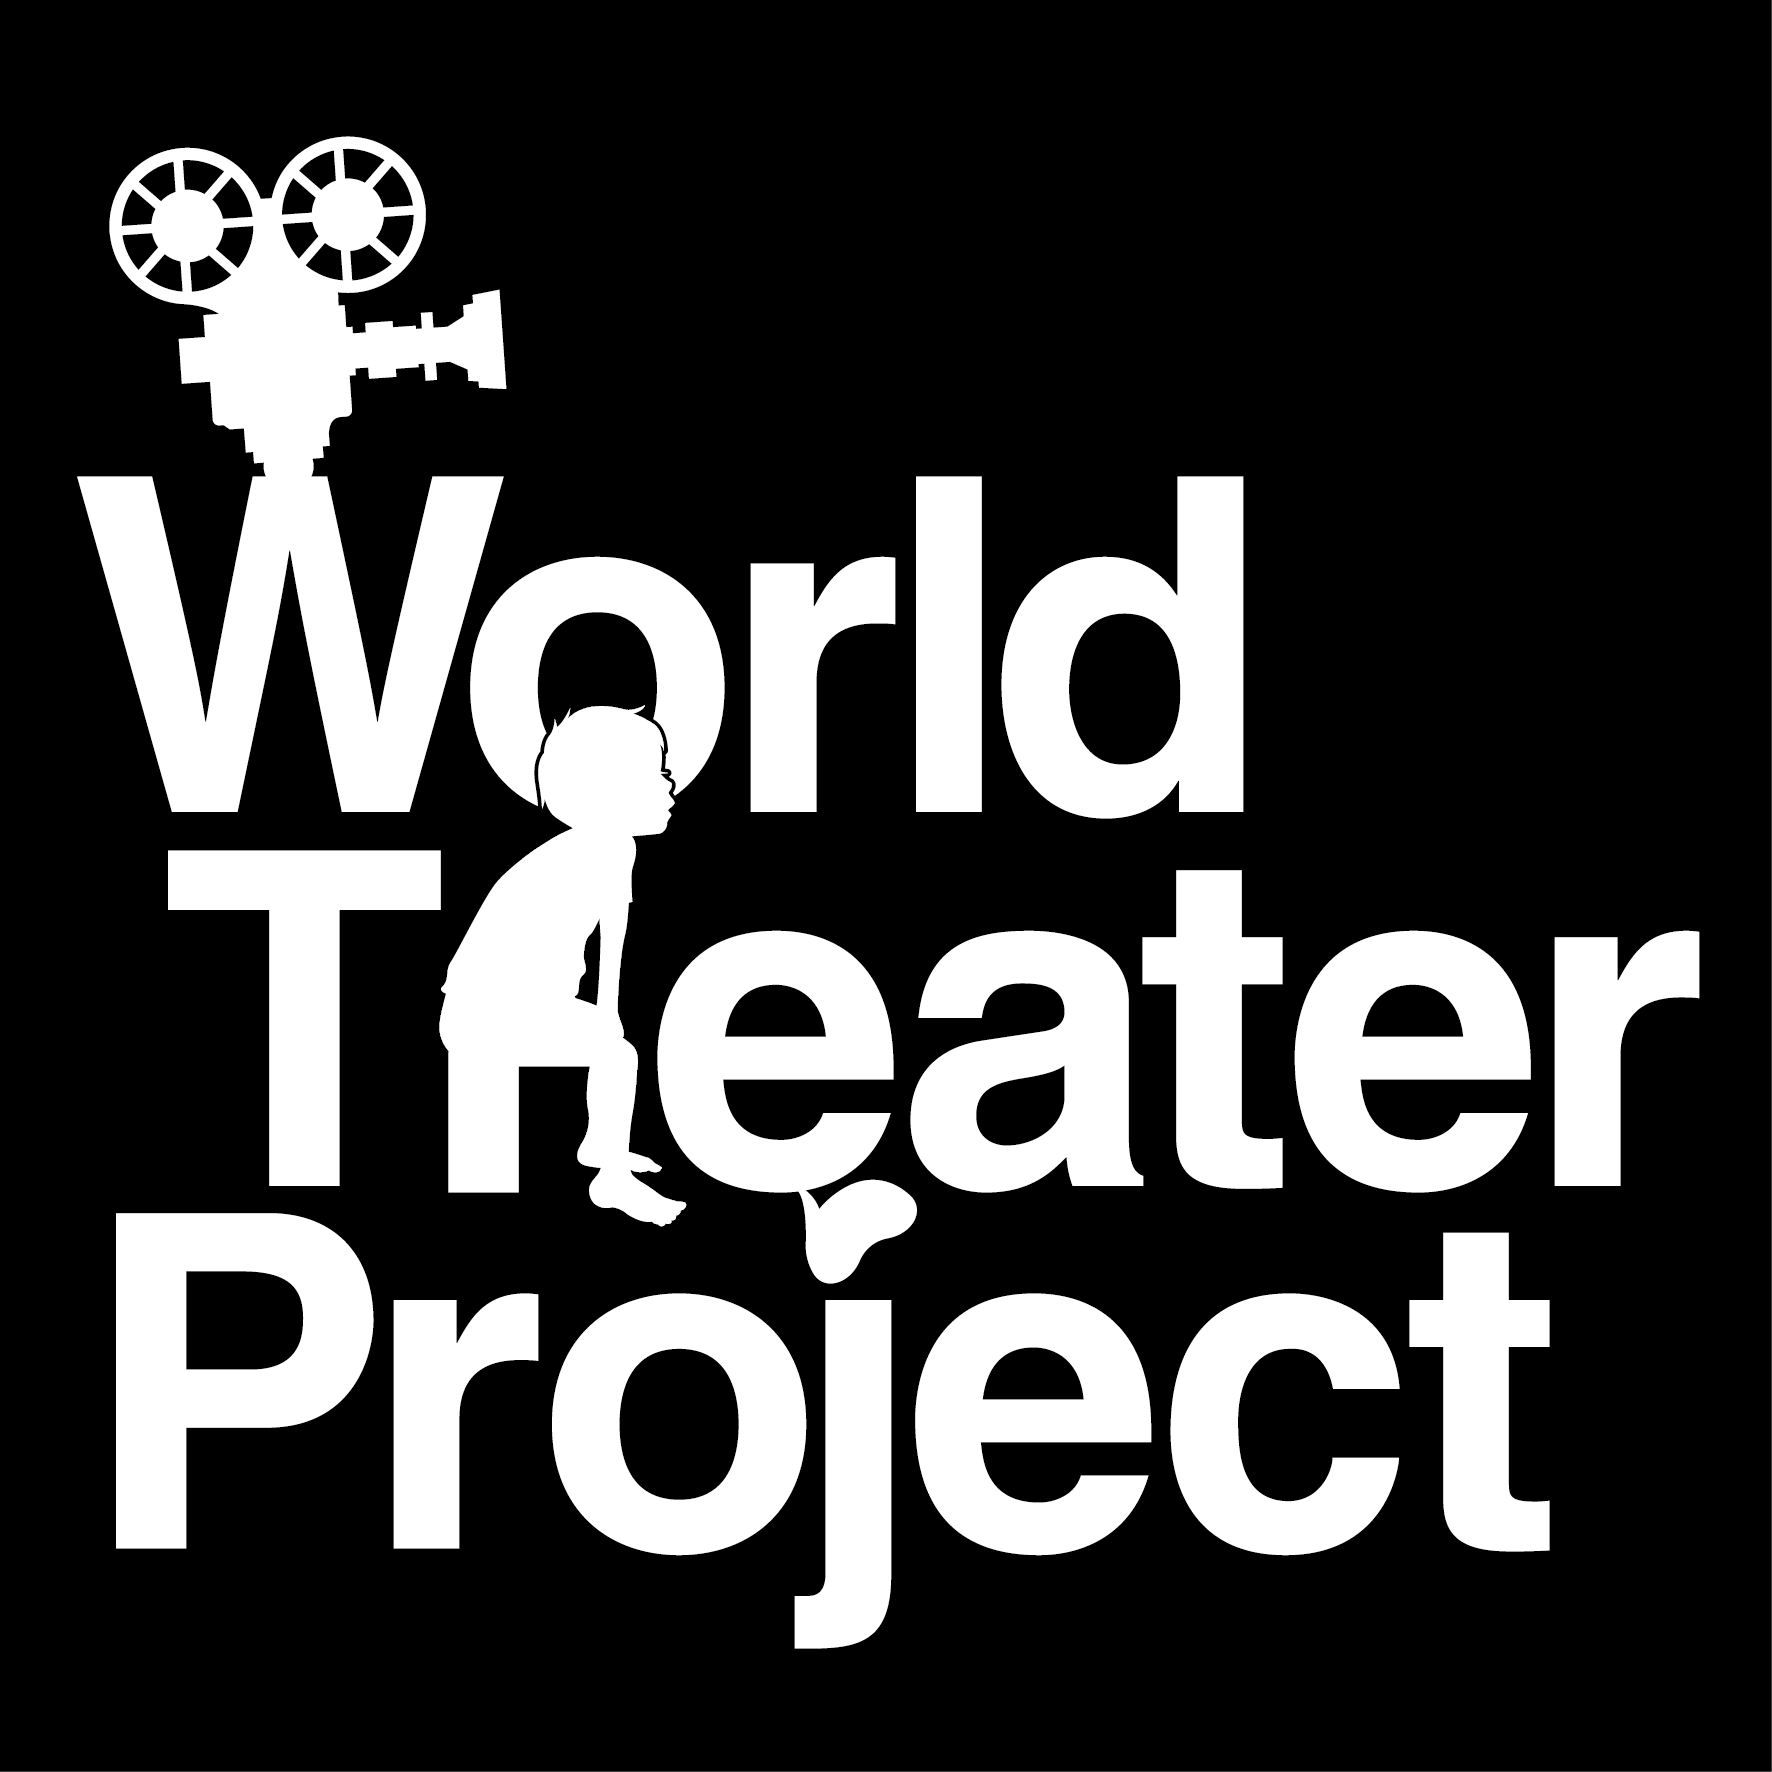 World Theater Project